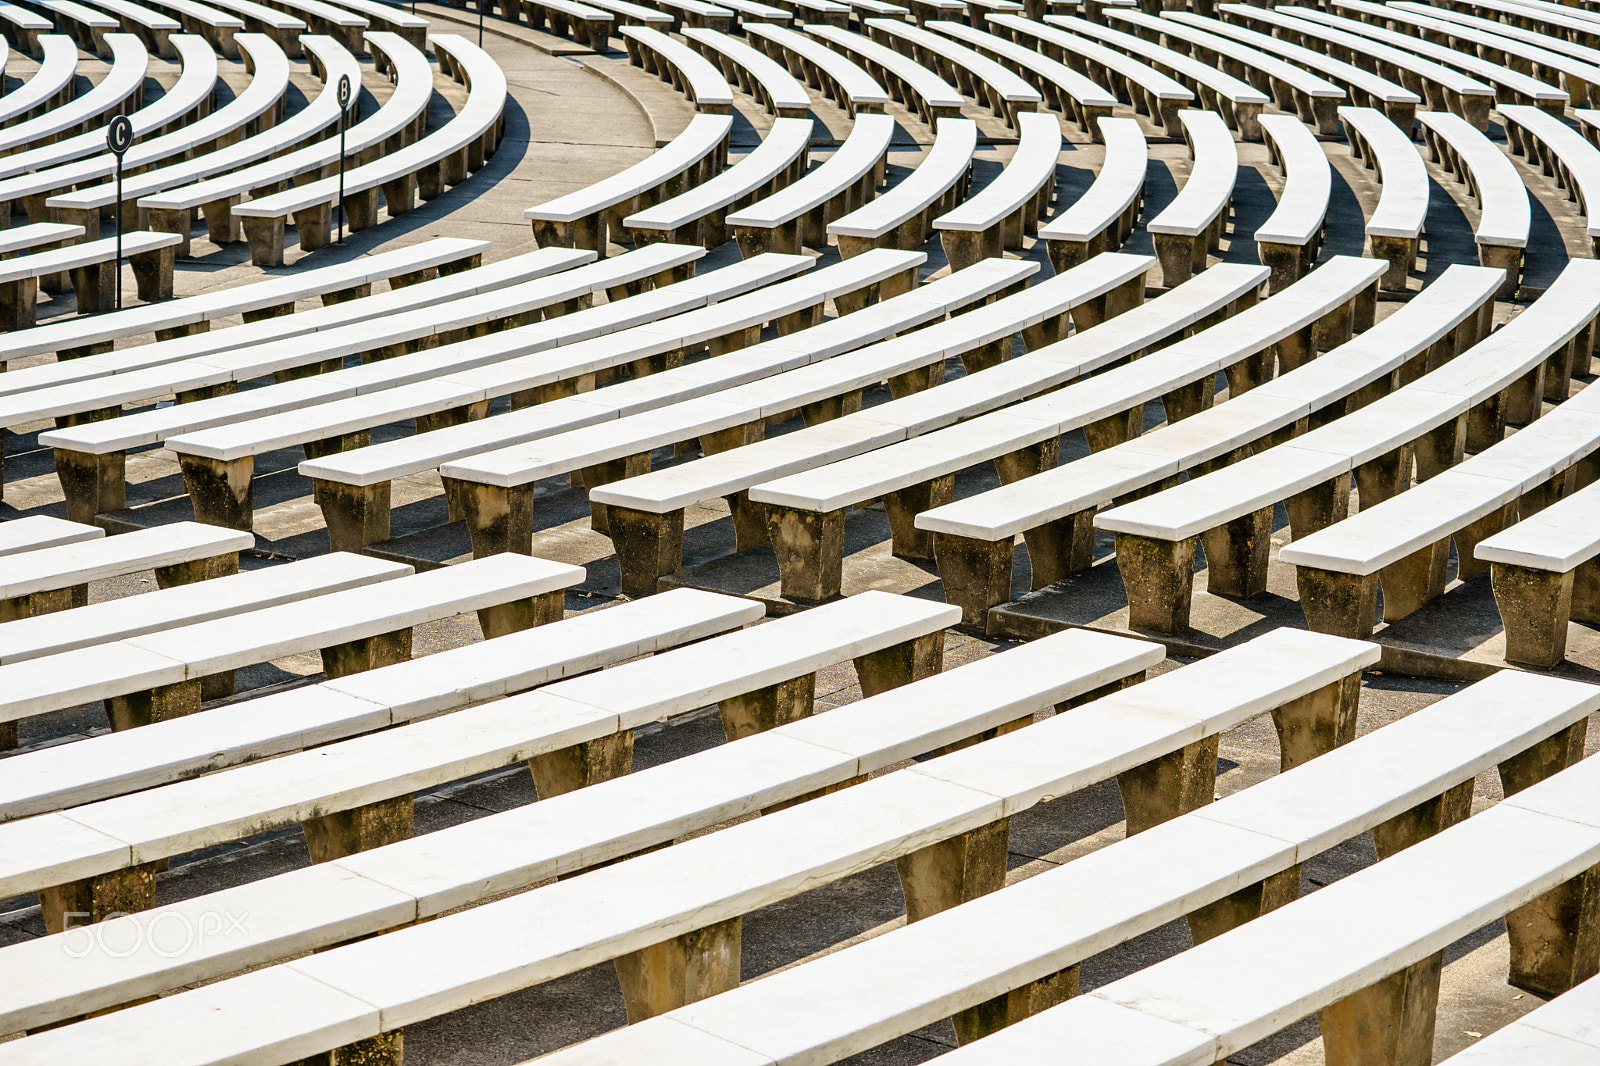 Sony a7 II sample photo. Benches in amphitheater photography